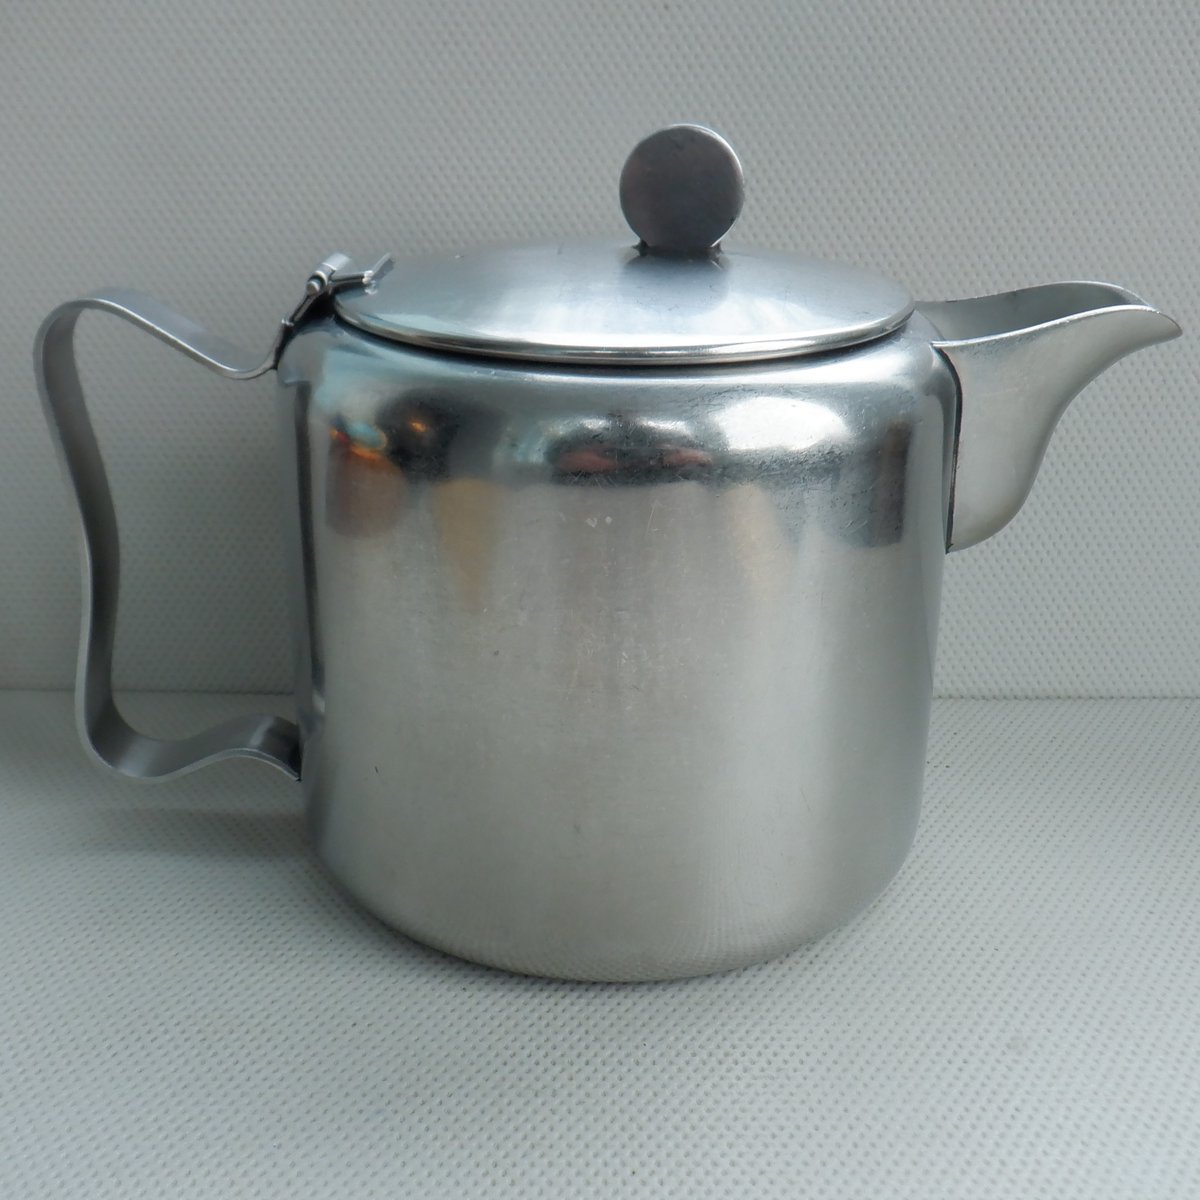 A vintage 1900s stainless steel 2 pint teapot. Made in England by Elkington & Co. 🫖 🛒 ebay.co.uk/itm/1762457083… #Vintage #FollowVintage #VintageTeapot #Elkington #Kitchenalia #TeaHour